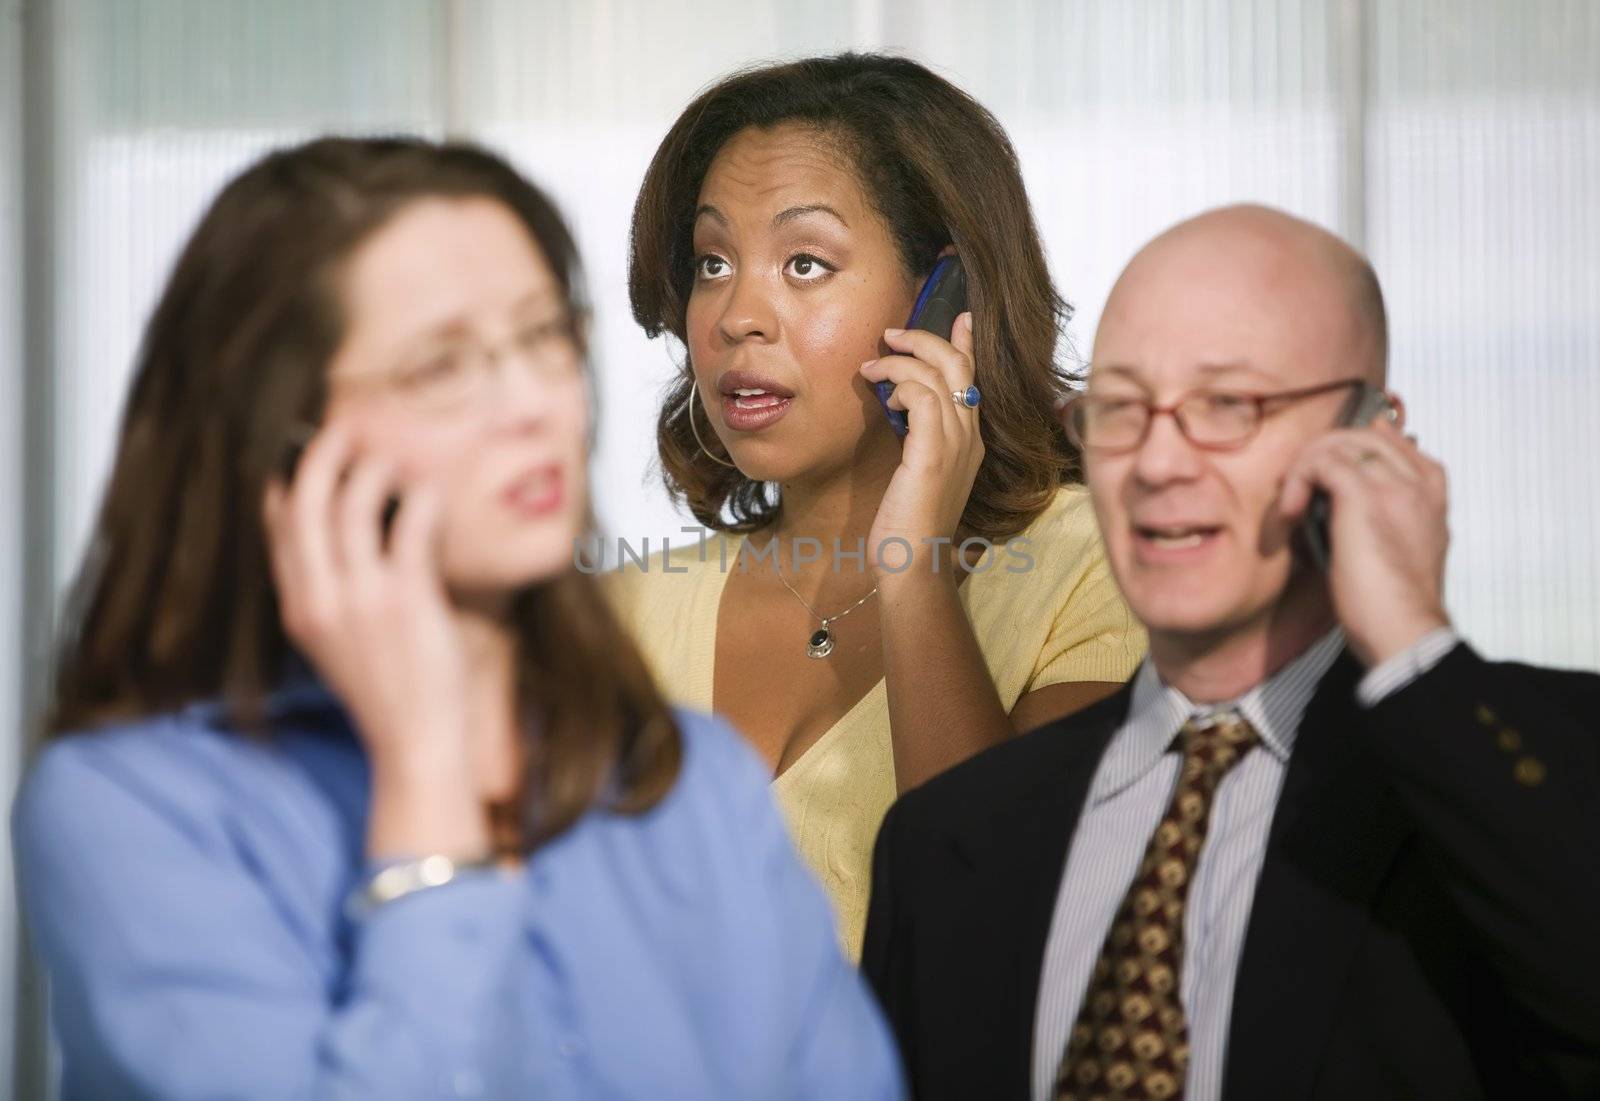 Selective focus on three businesspeople using cell phones